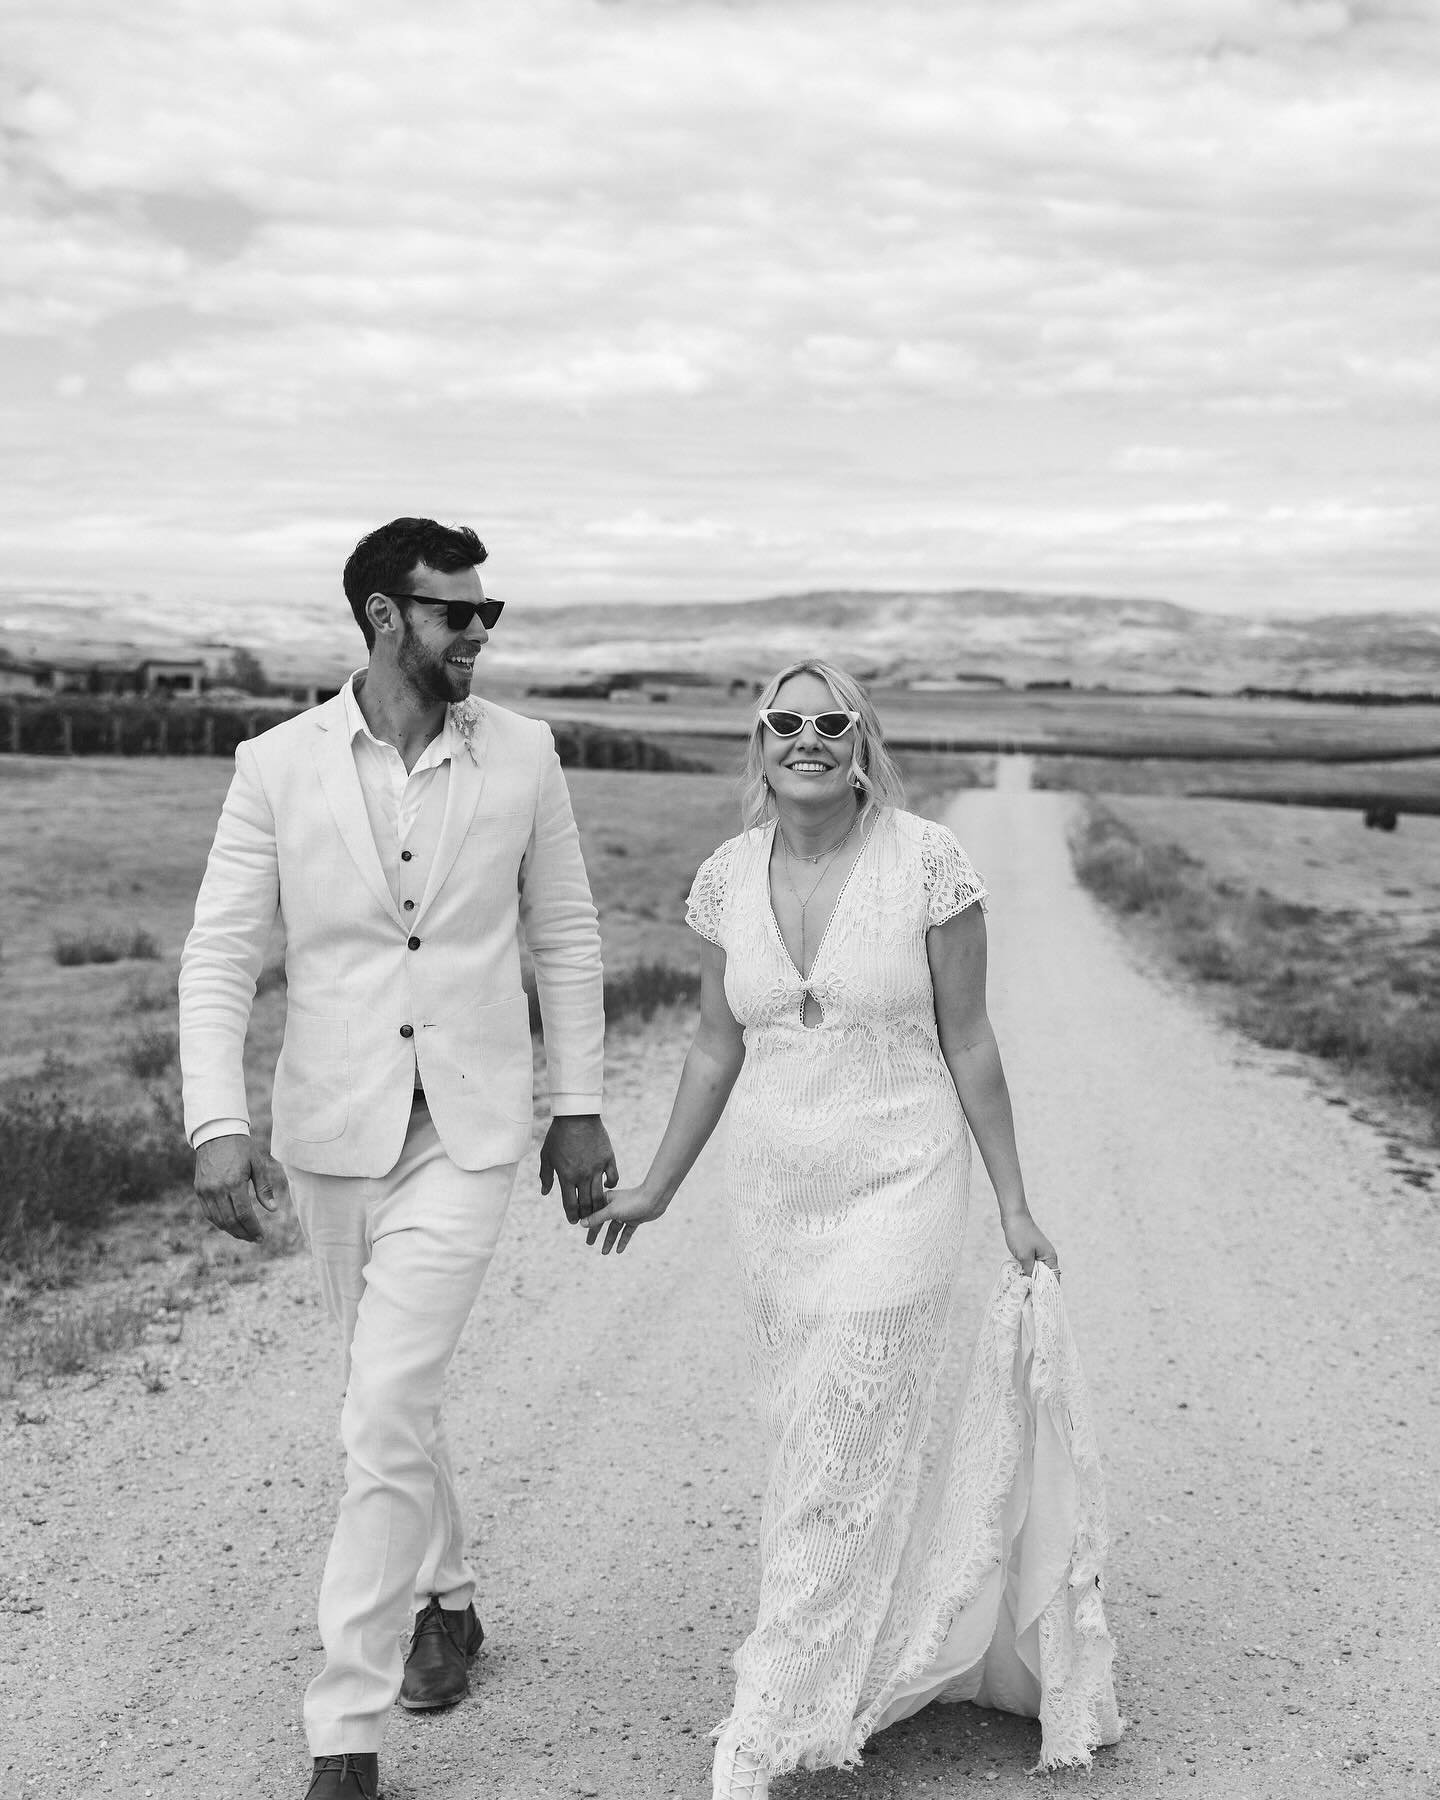 One of my favourites from R&amp;M&rsquo;s first look. 🤍

#alexandrawedding #vineyardwedding #alexandraweddingphotographer #otagoweddingphotographer #diywedding #nzweddingphotographer #newzealandweddings #nzwedding #nzweddingphotography #newzealandwe